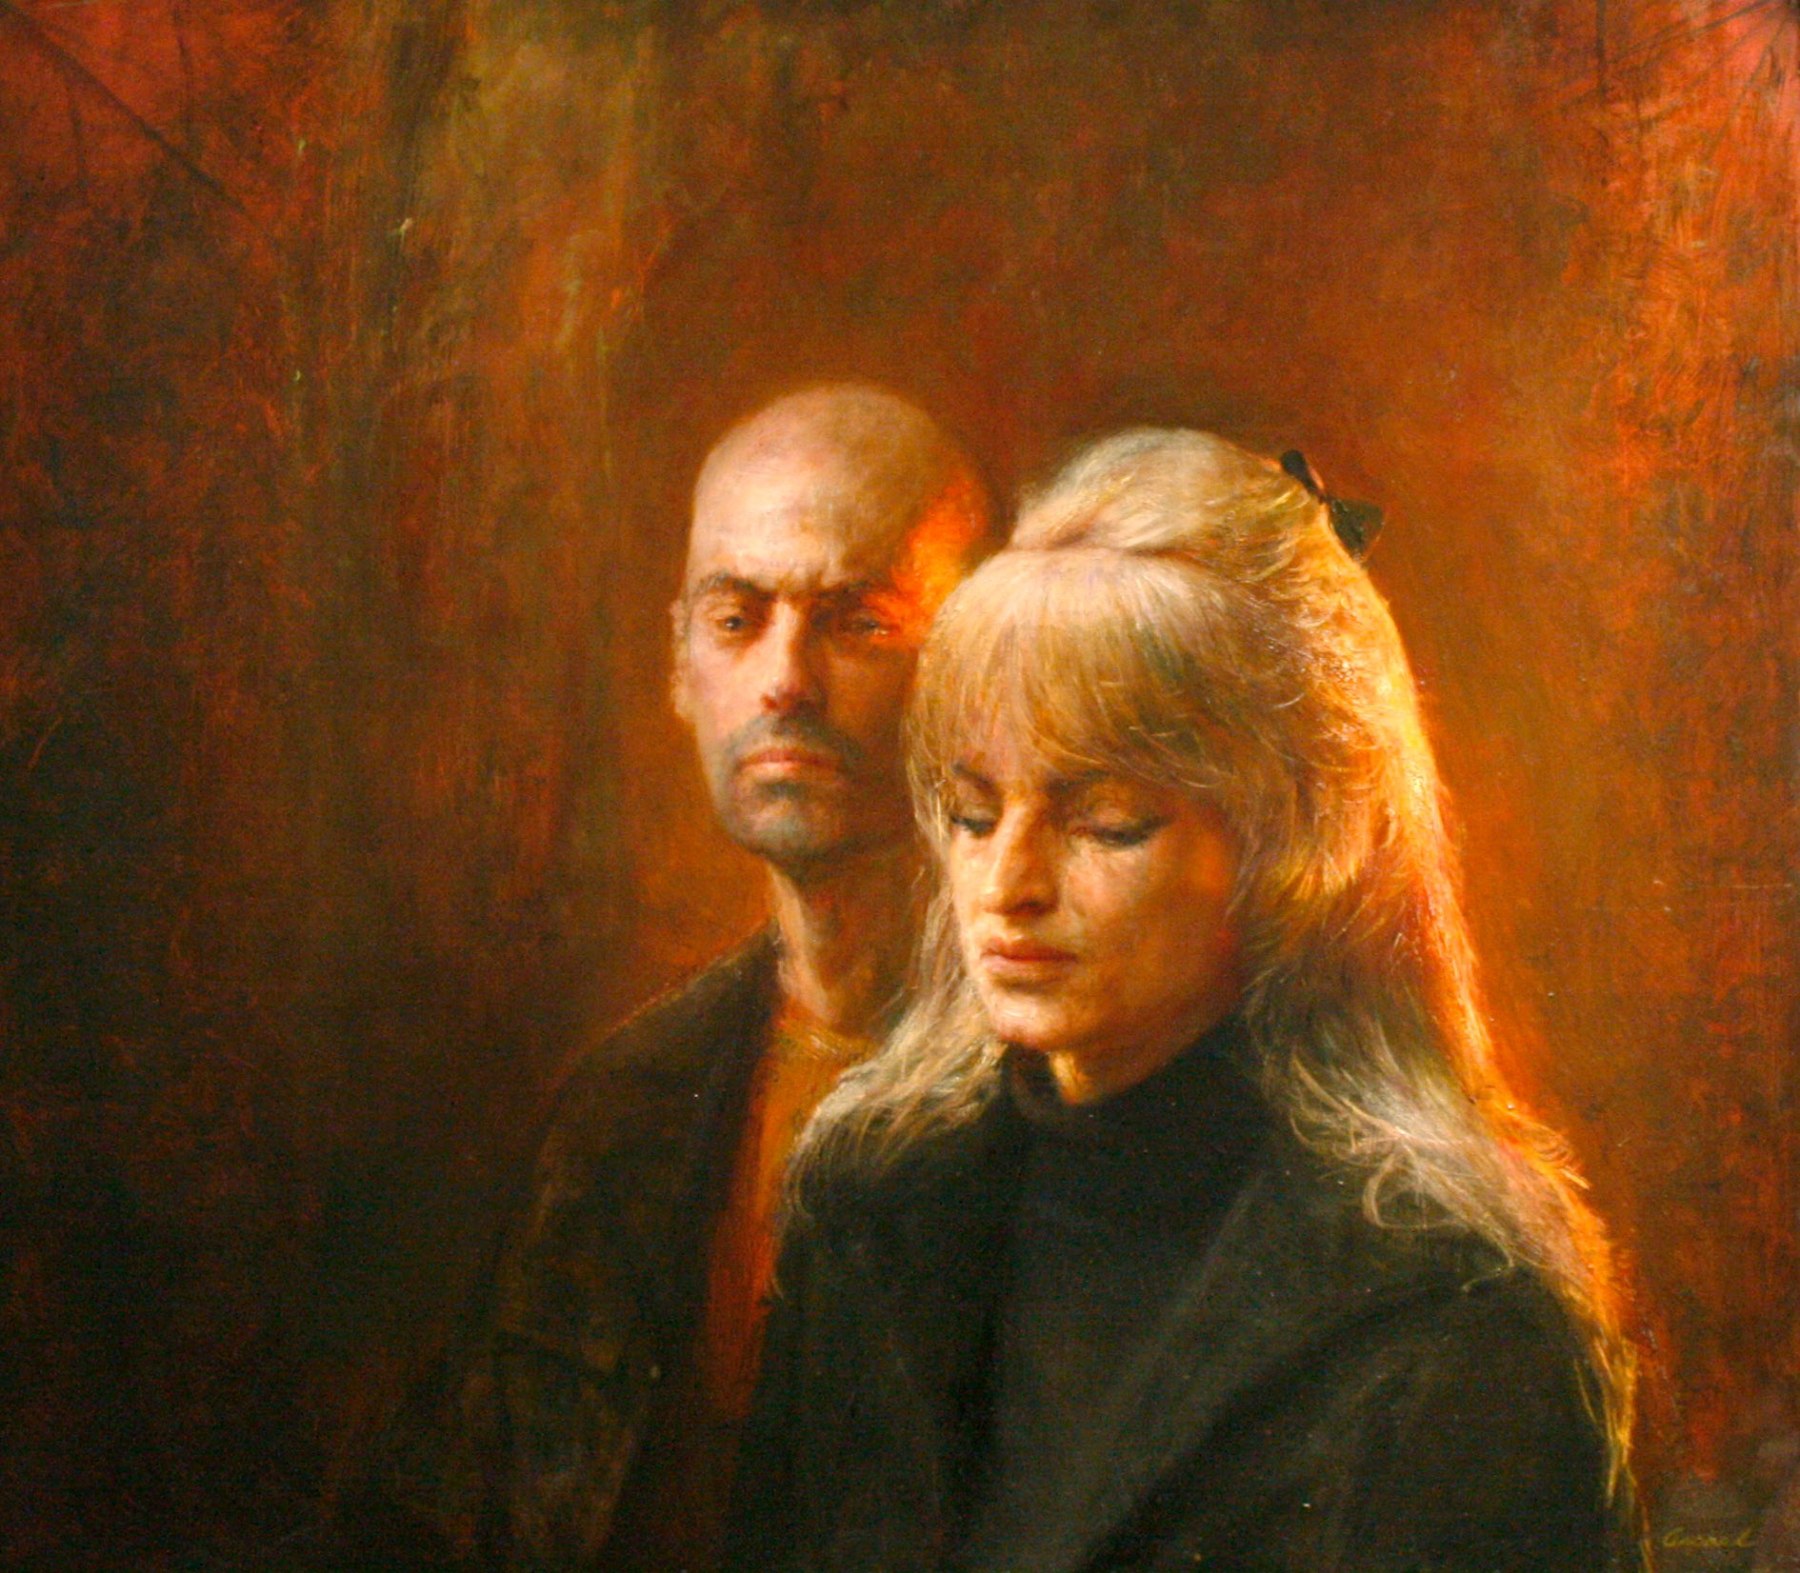 Steven Assael, Elena and Mark, 2008, oil on panel, 33 1/2 x 38 inches